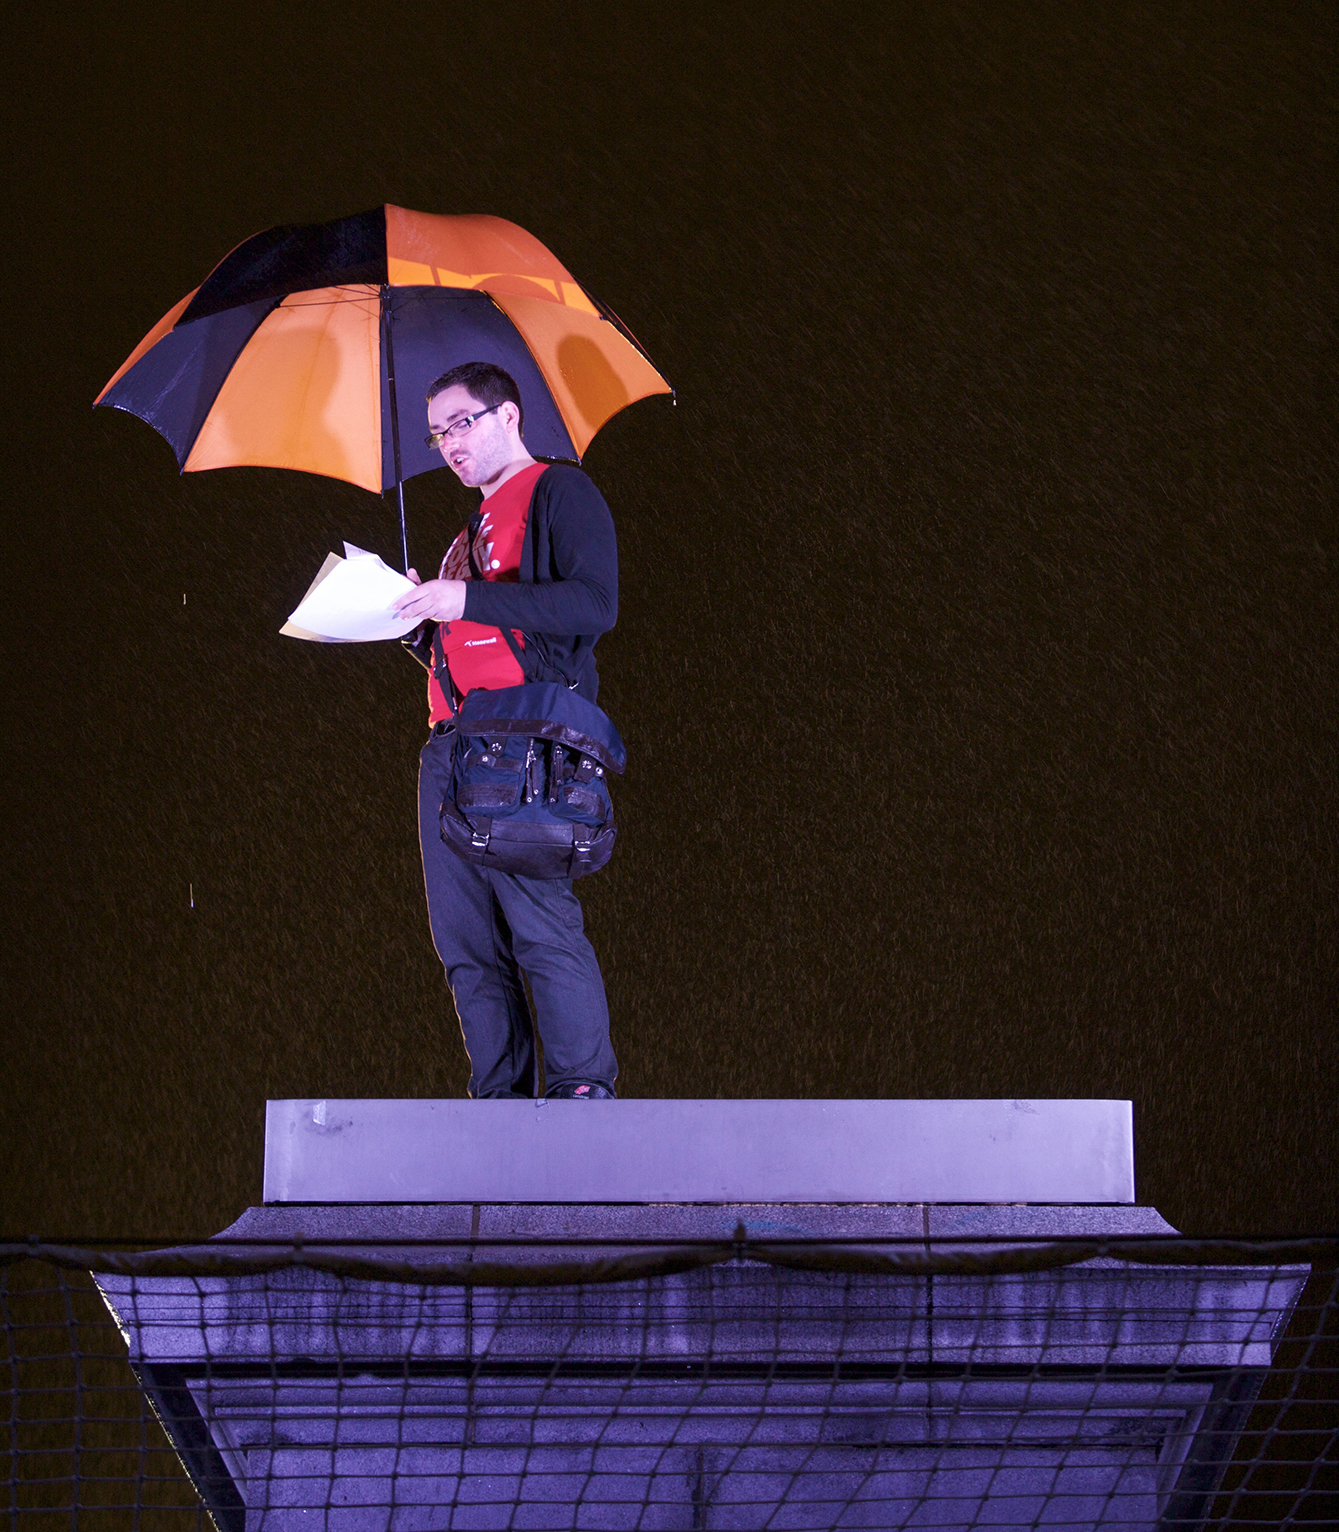 Man standing on the Fourth Plinth at night with umbrella 